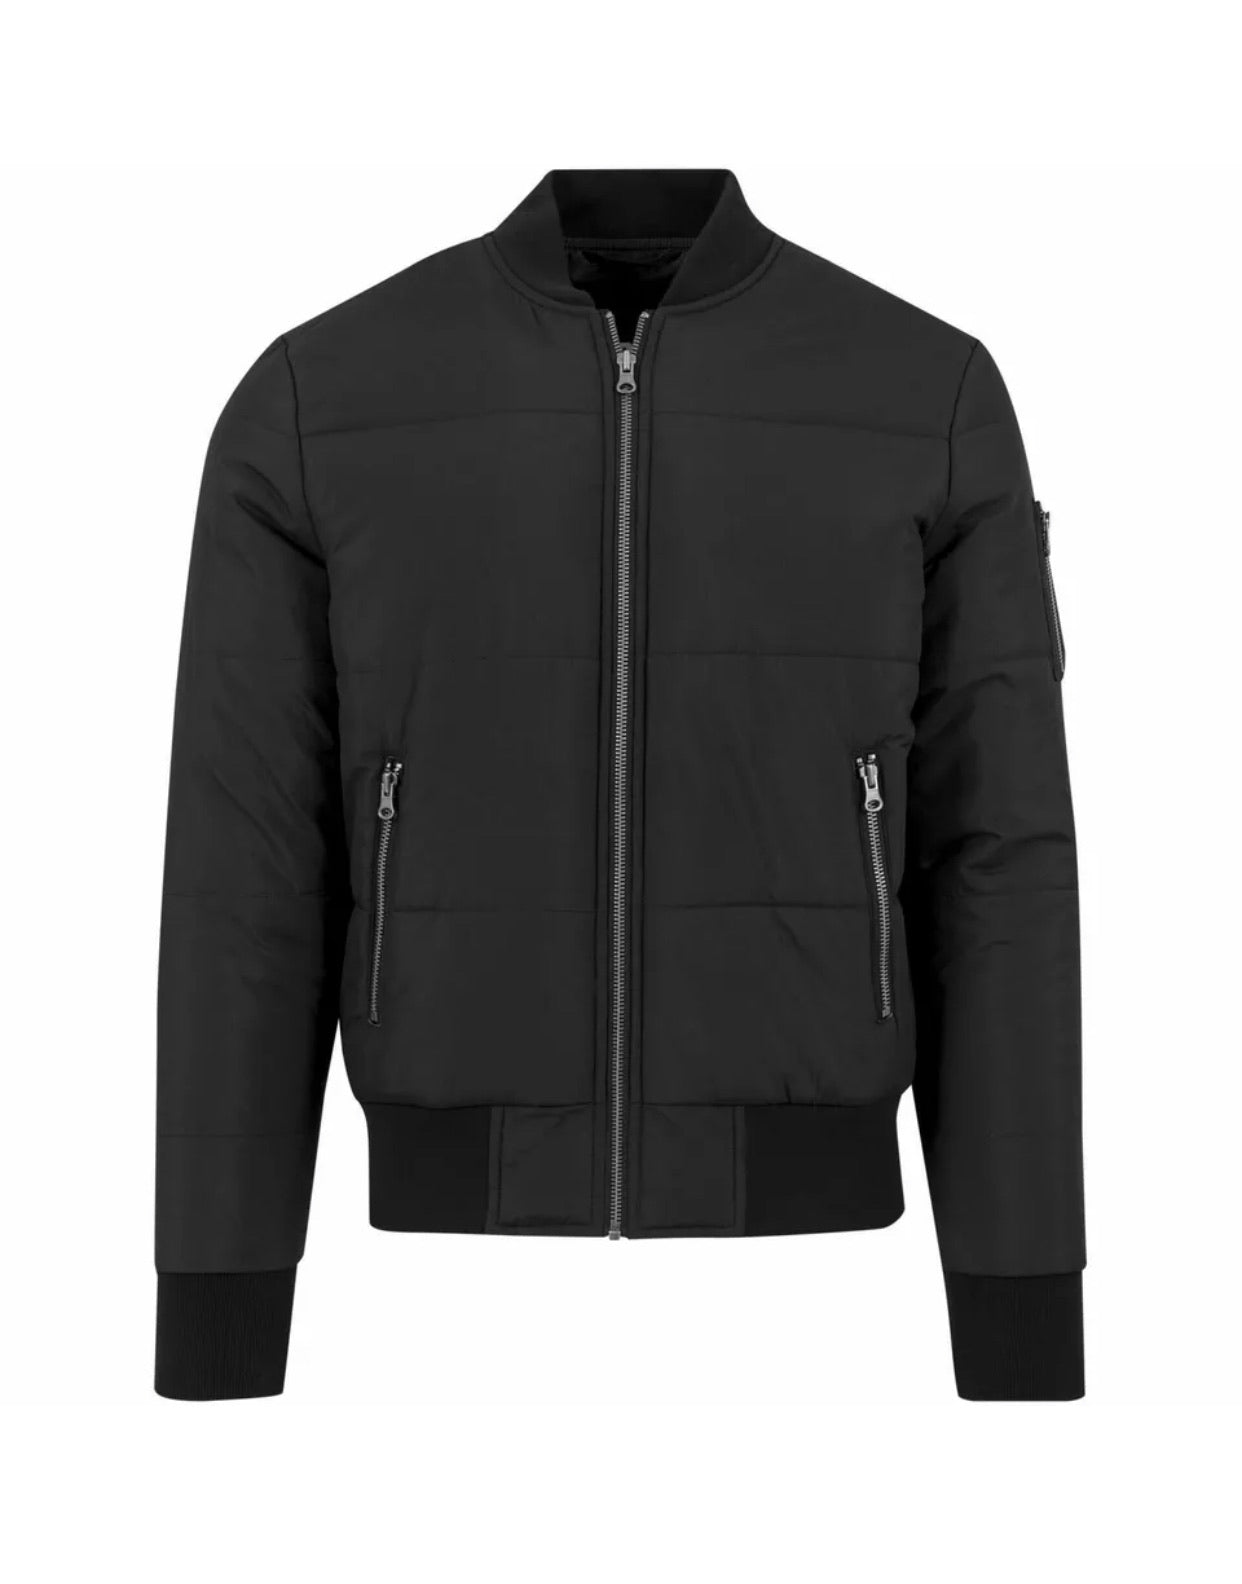 The Quilted Renegade Bomber Jacket - Limited Stock